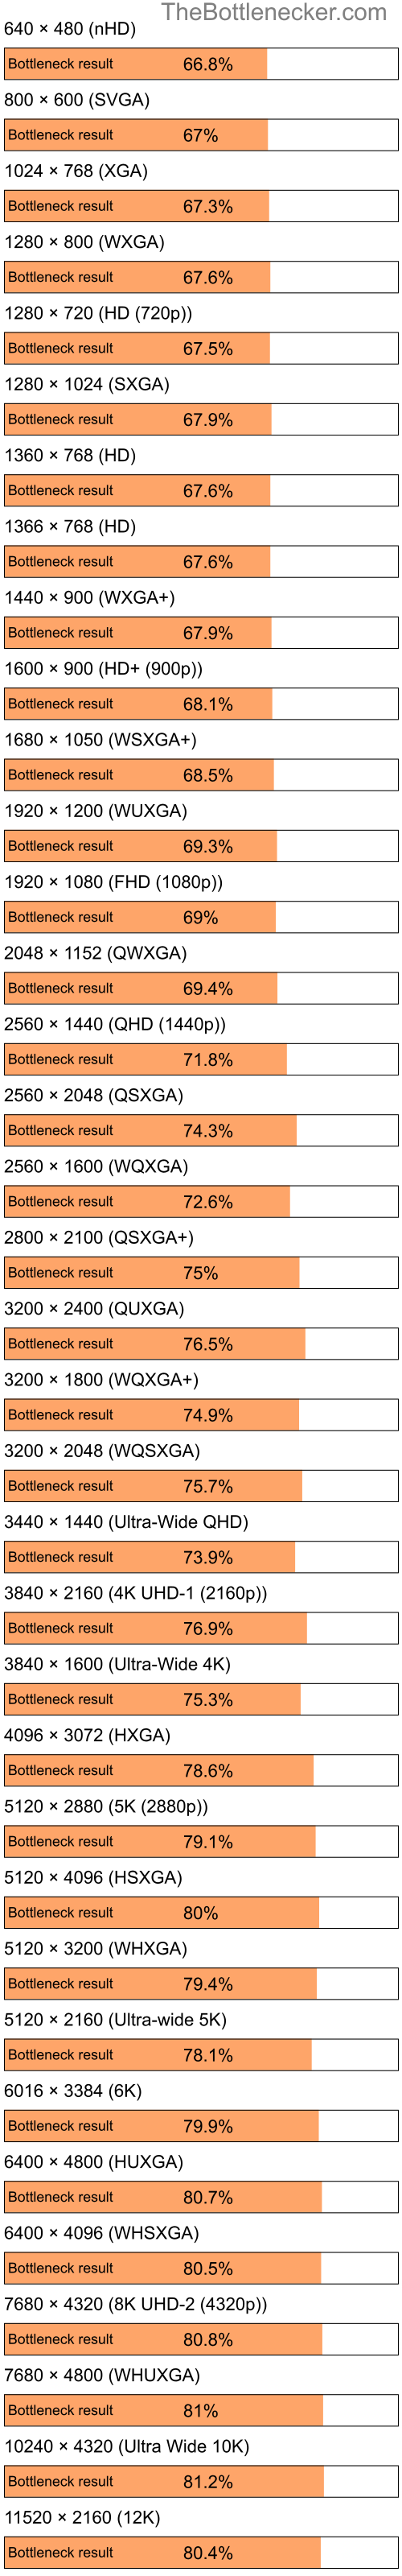 Bottleneck results by resolution for Intel Celeron and NVIDIA Quadro FX 3000 in General Tasks